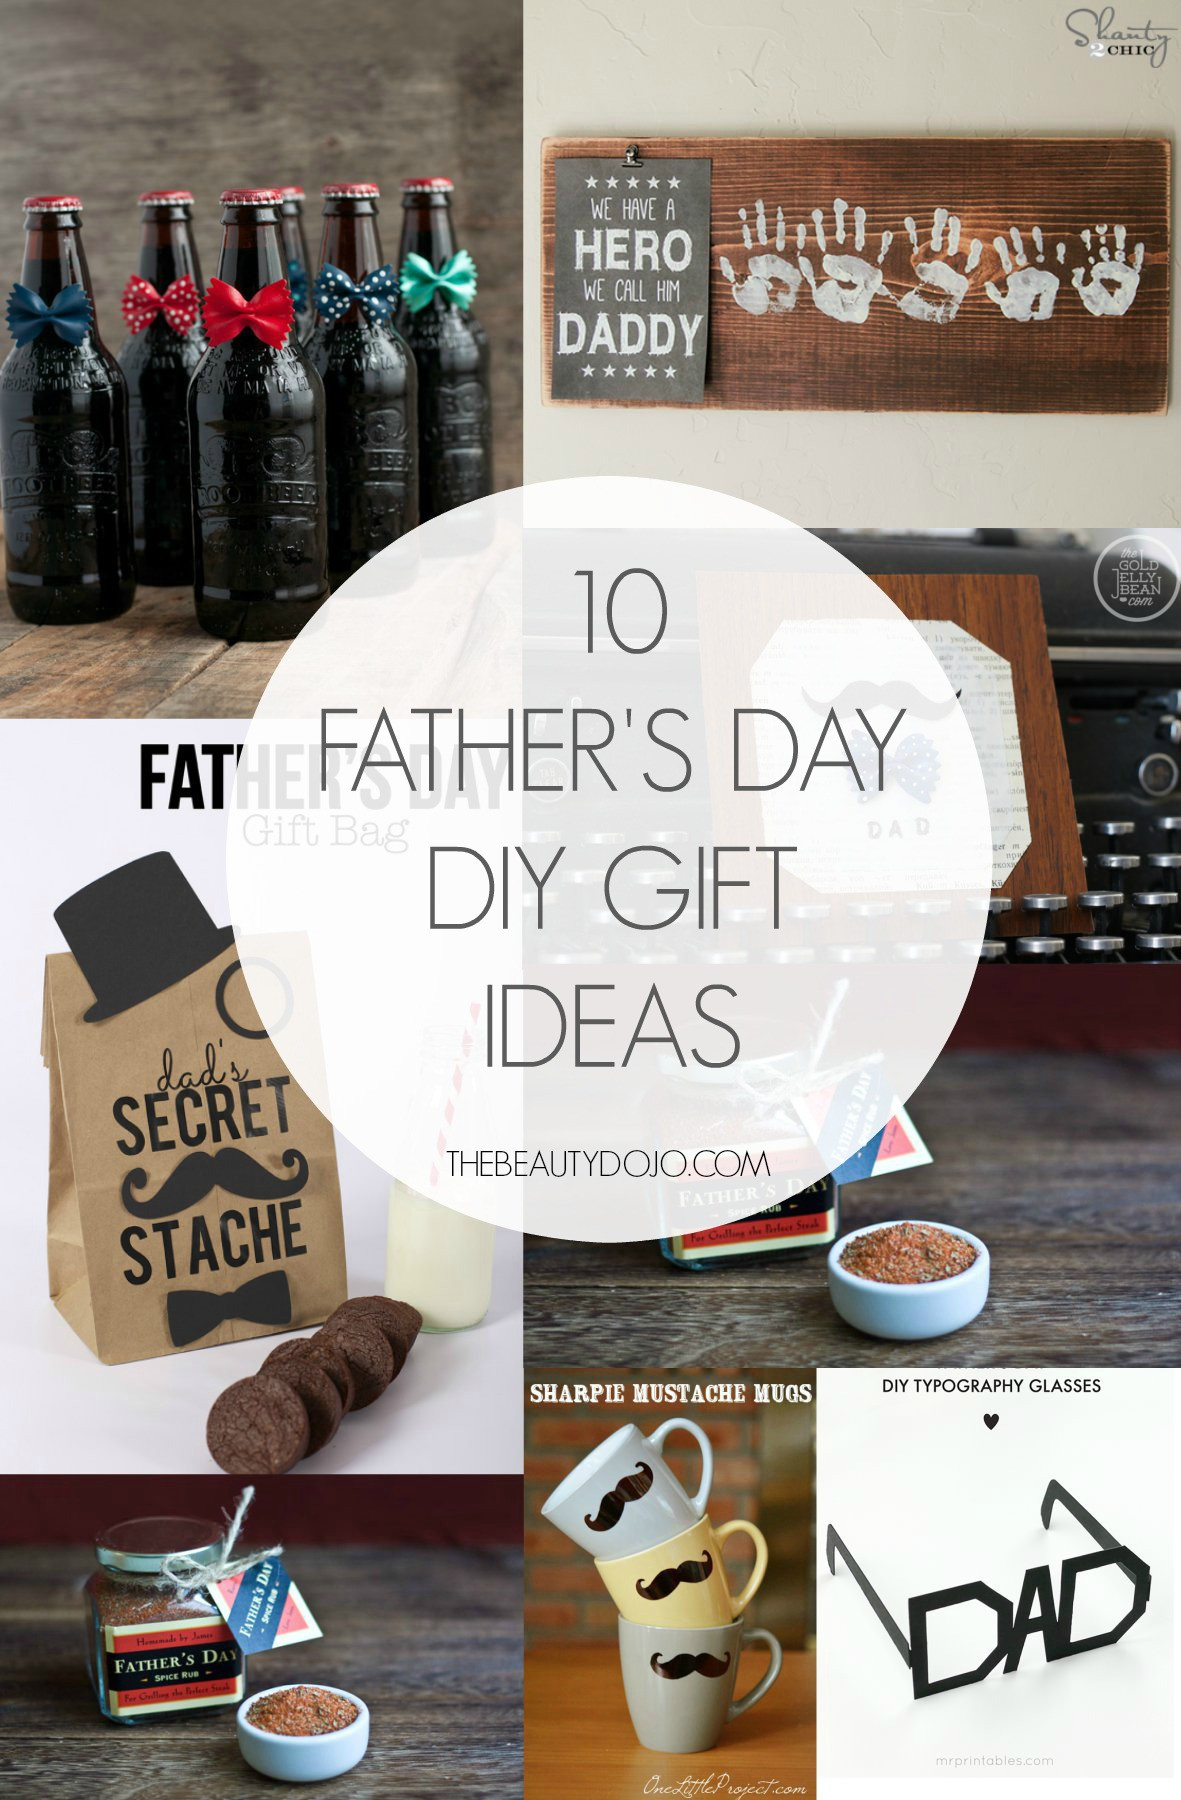 Father'S Day Gift Ideas For Church Congregation
 10 Father s Day DIY Gift Ideas The Beautydojo